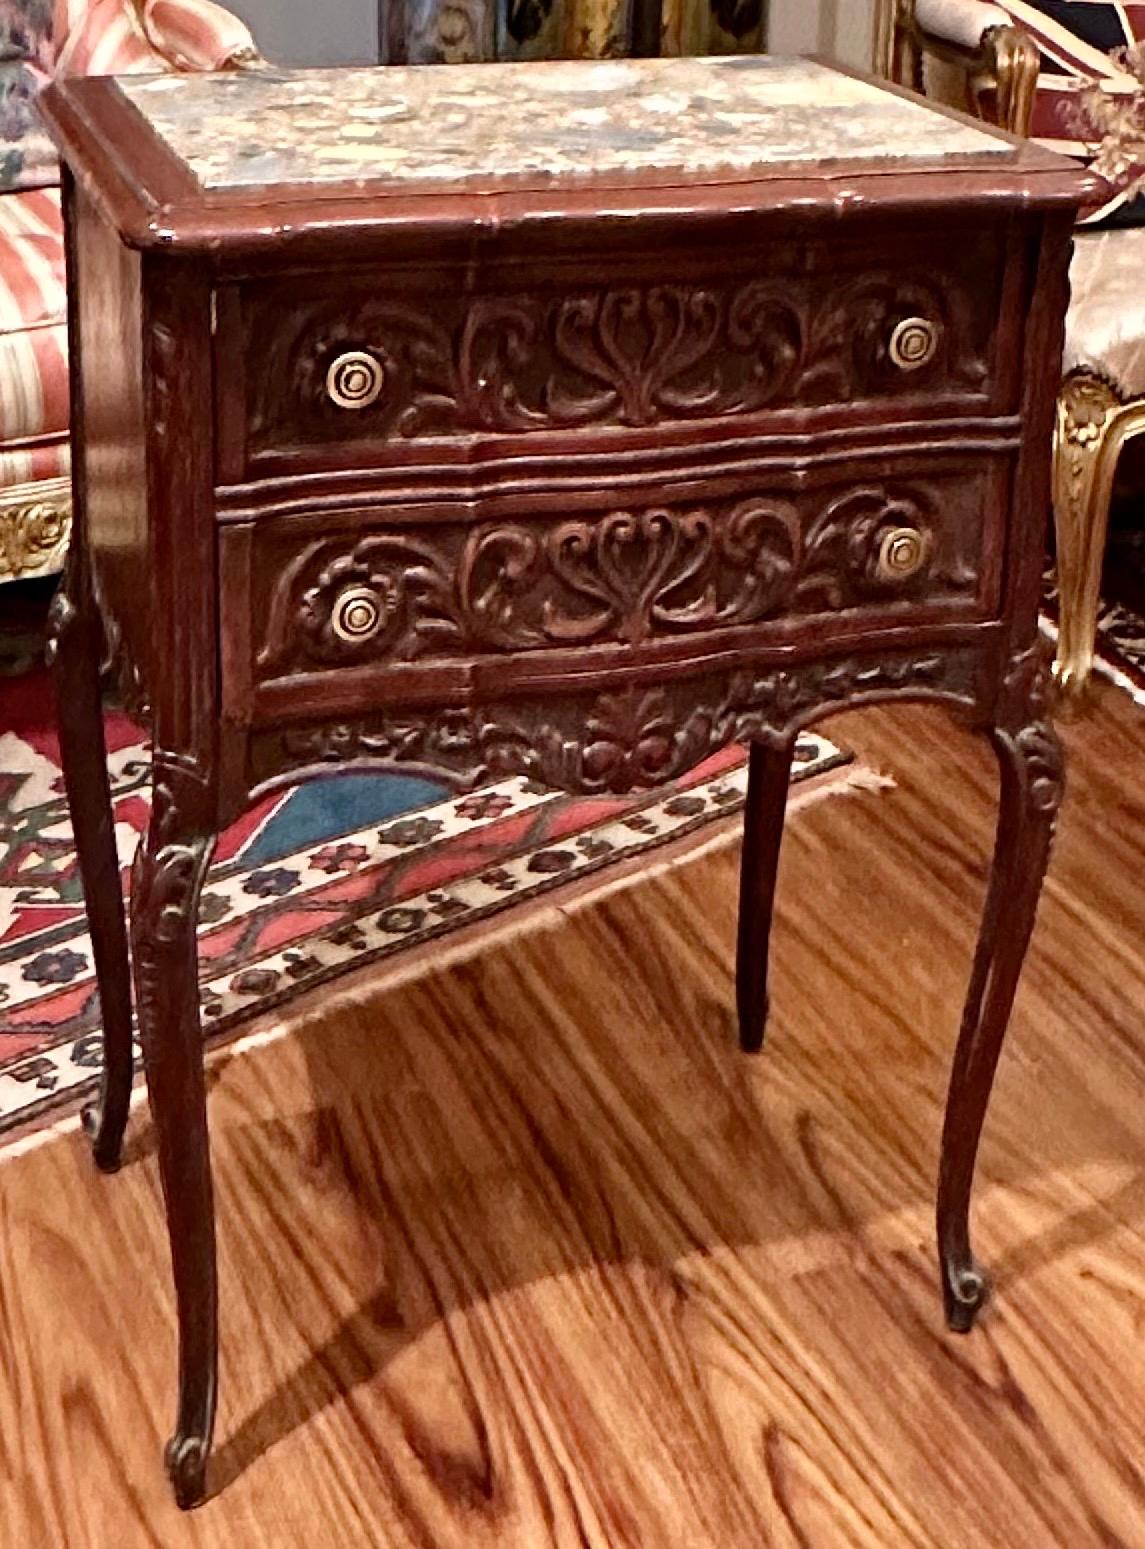 Pair of French Provincial Antique Marble Top Walnut Commodes

Late 19th century antique pair of Louis XV style marble top commodes .Each of the walnut stands have two heavily carved drawers with stylized foliate and scrollwork intertwined. Period